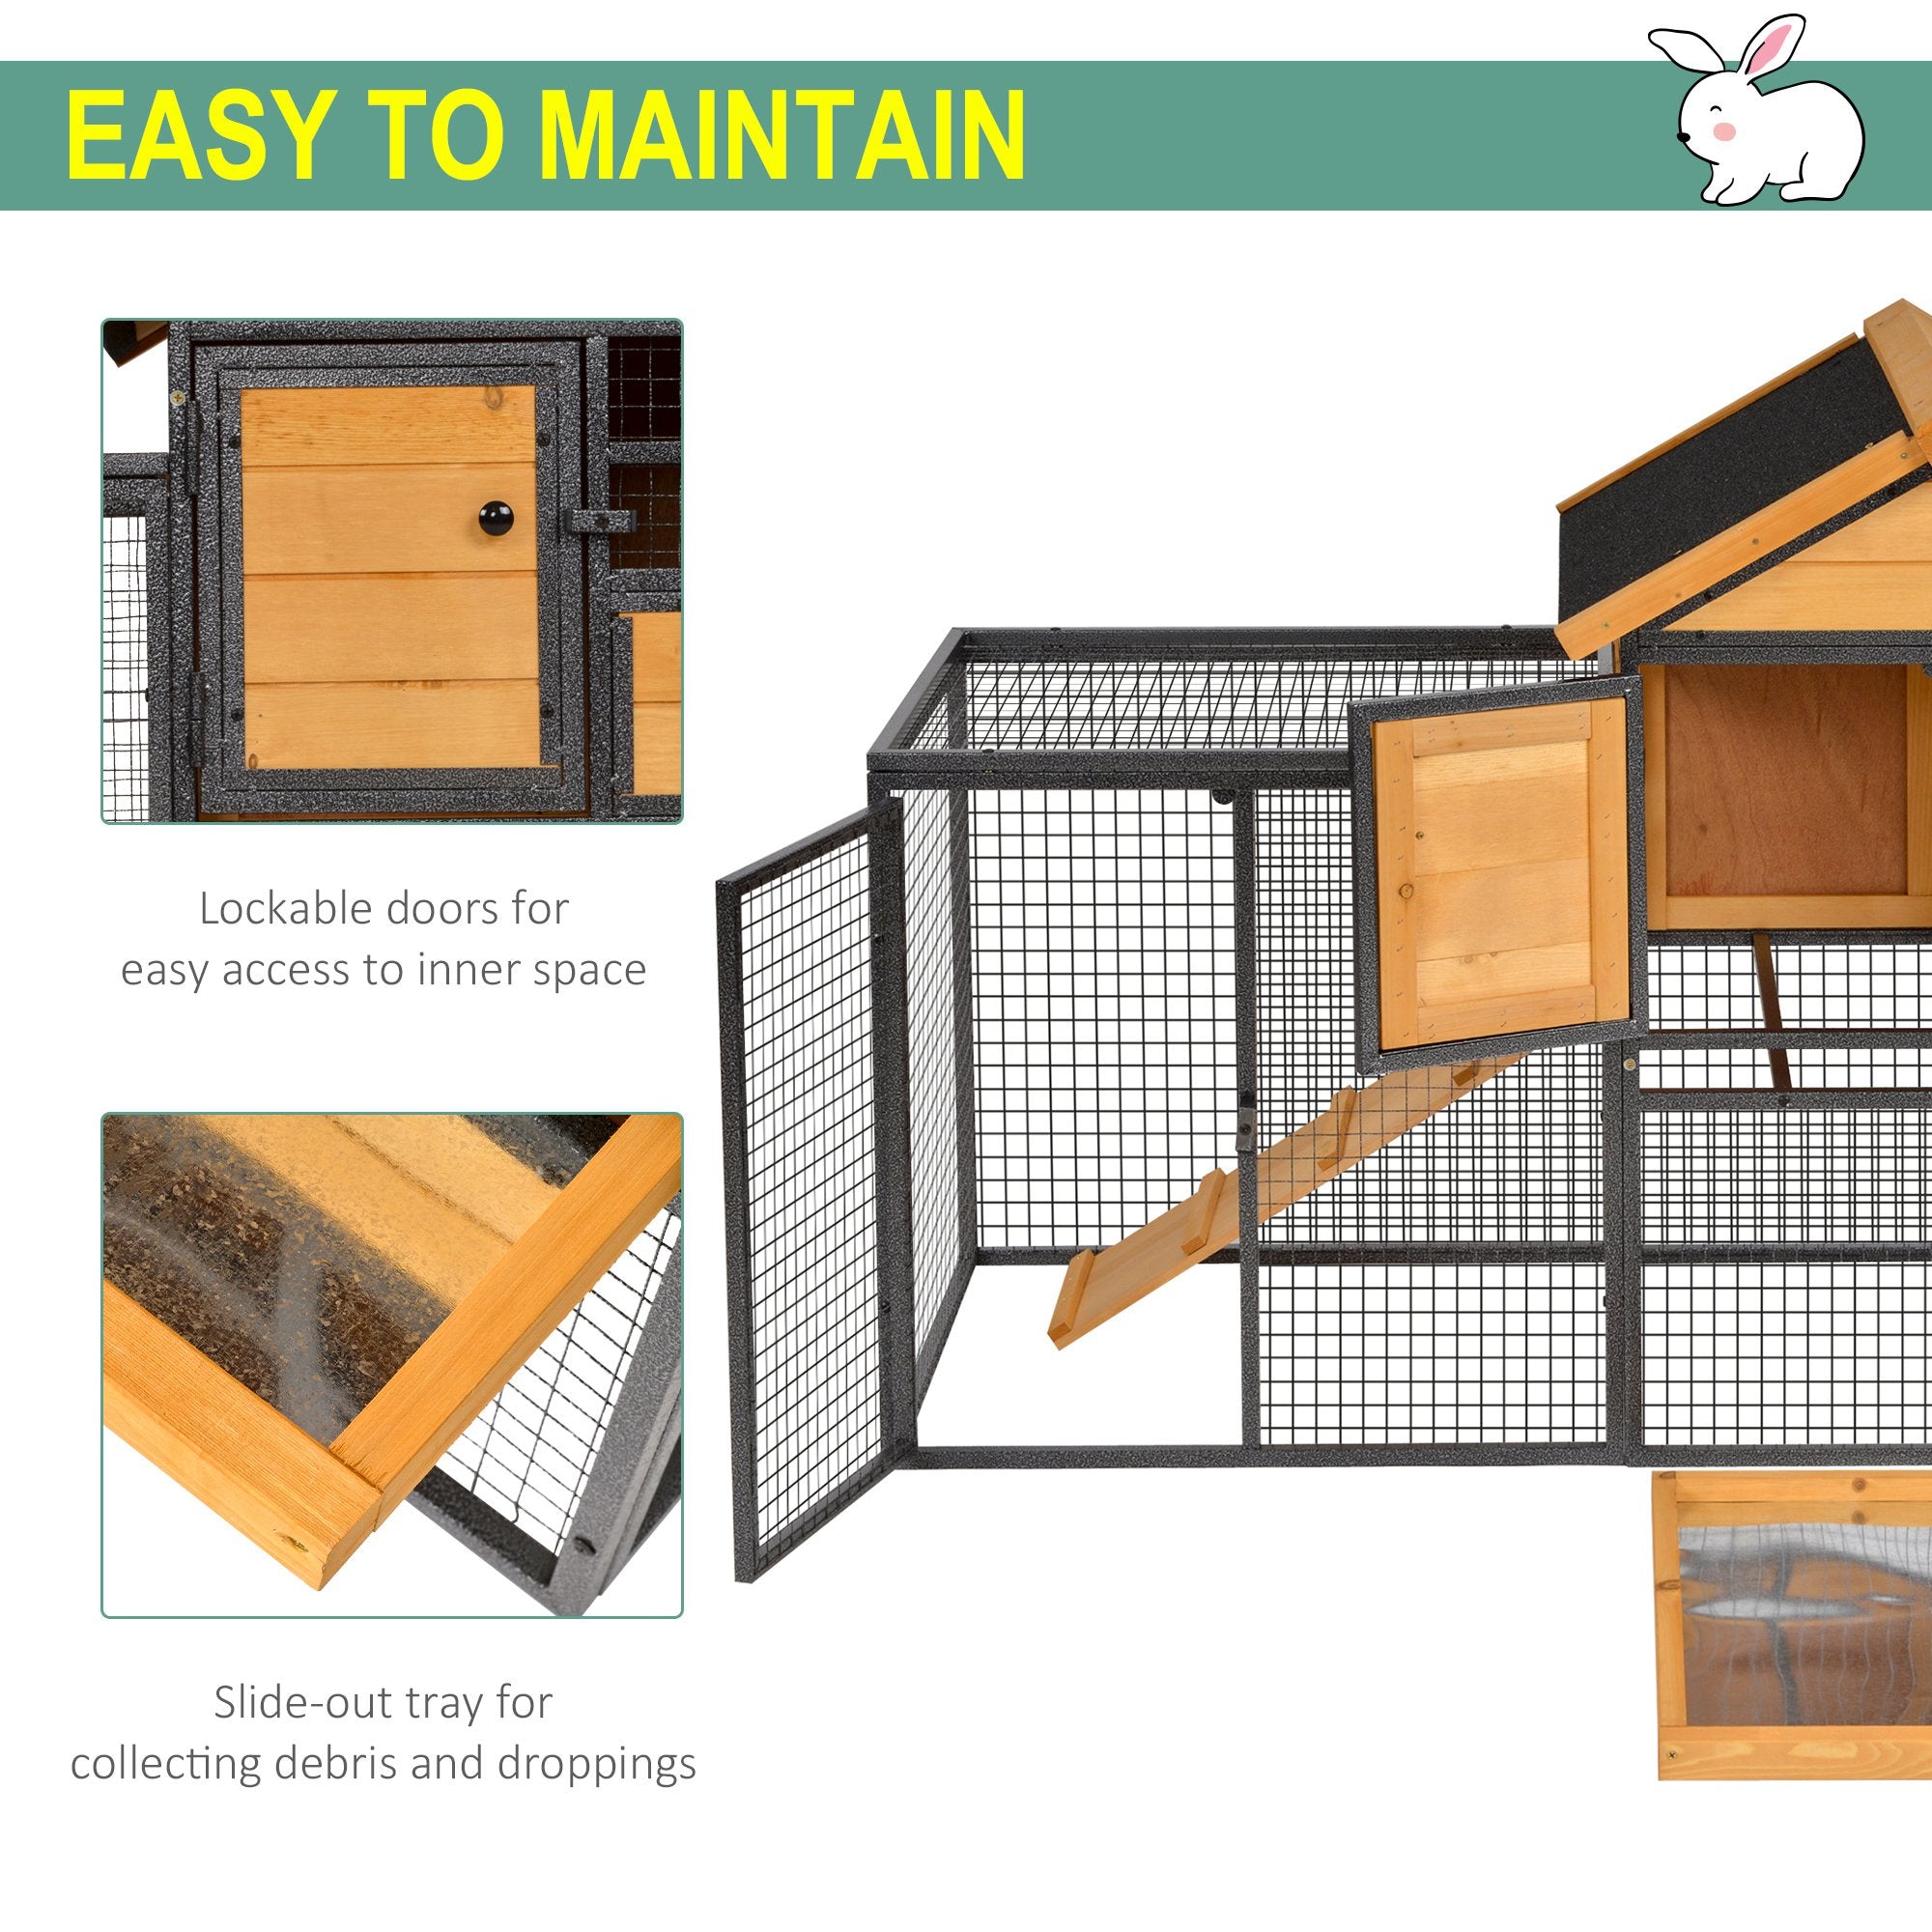 Wood-metal Rabbit Hutch Elevated Pet Bunny House Rabbit Cage with Slide-Out Tray Outdoor